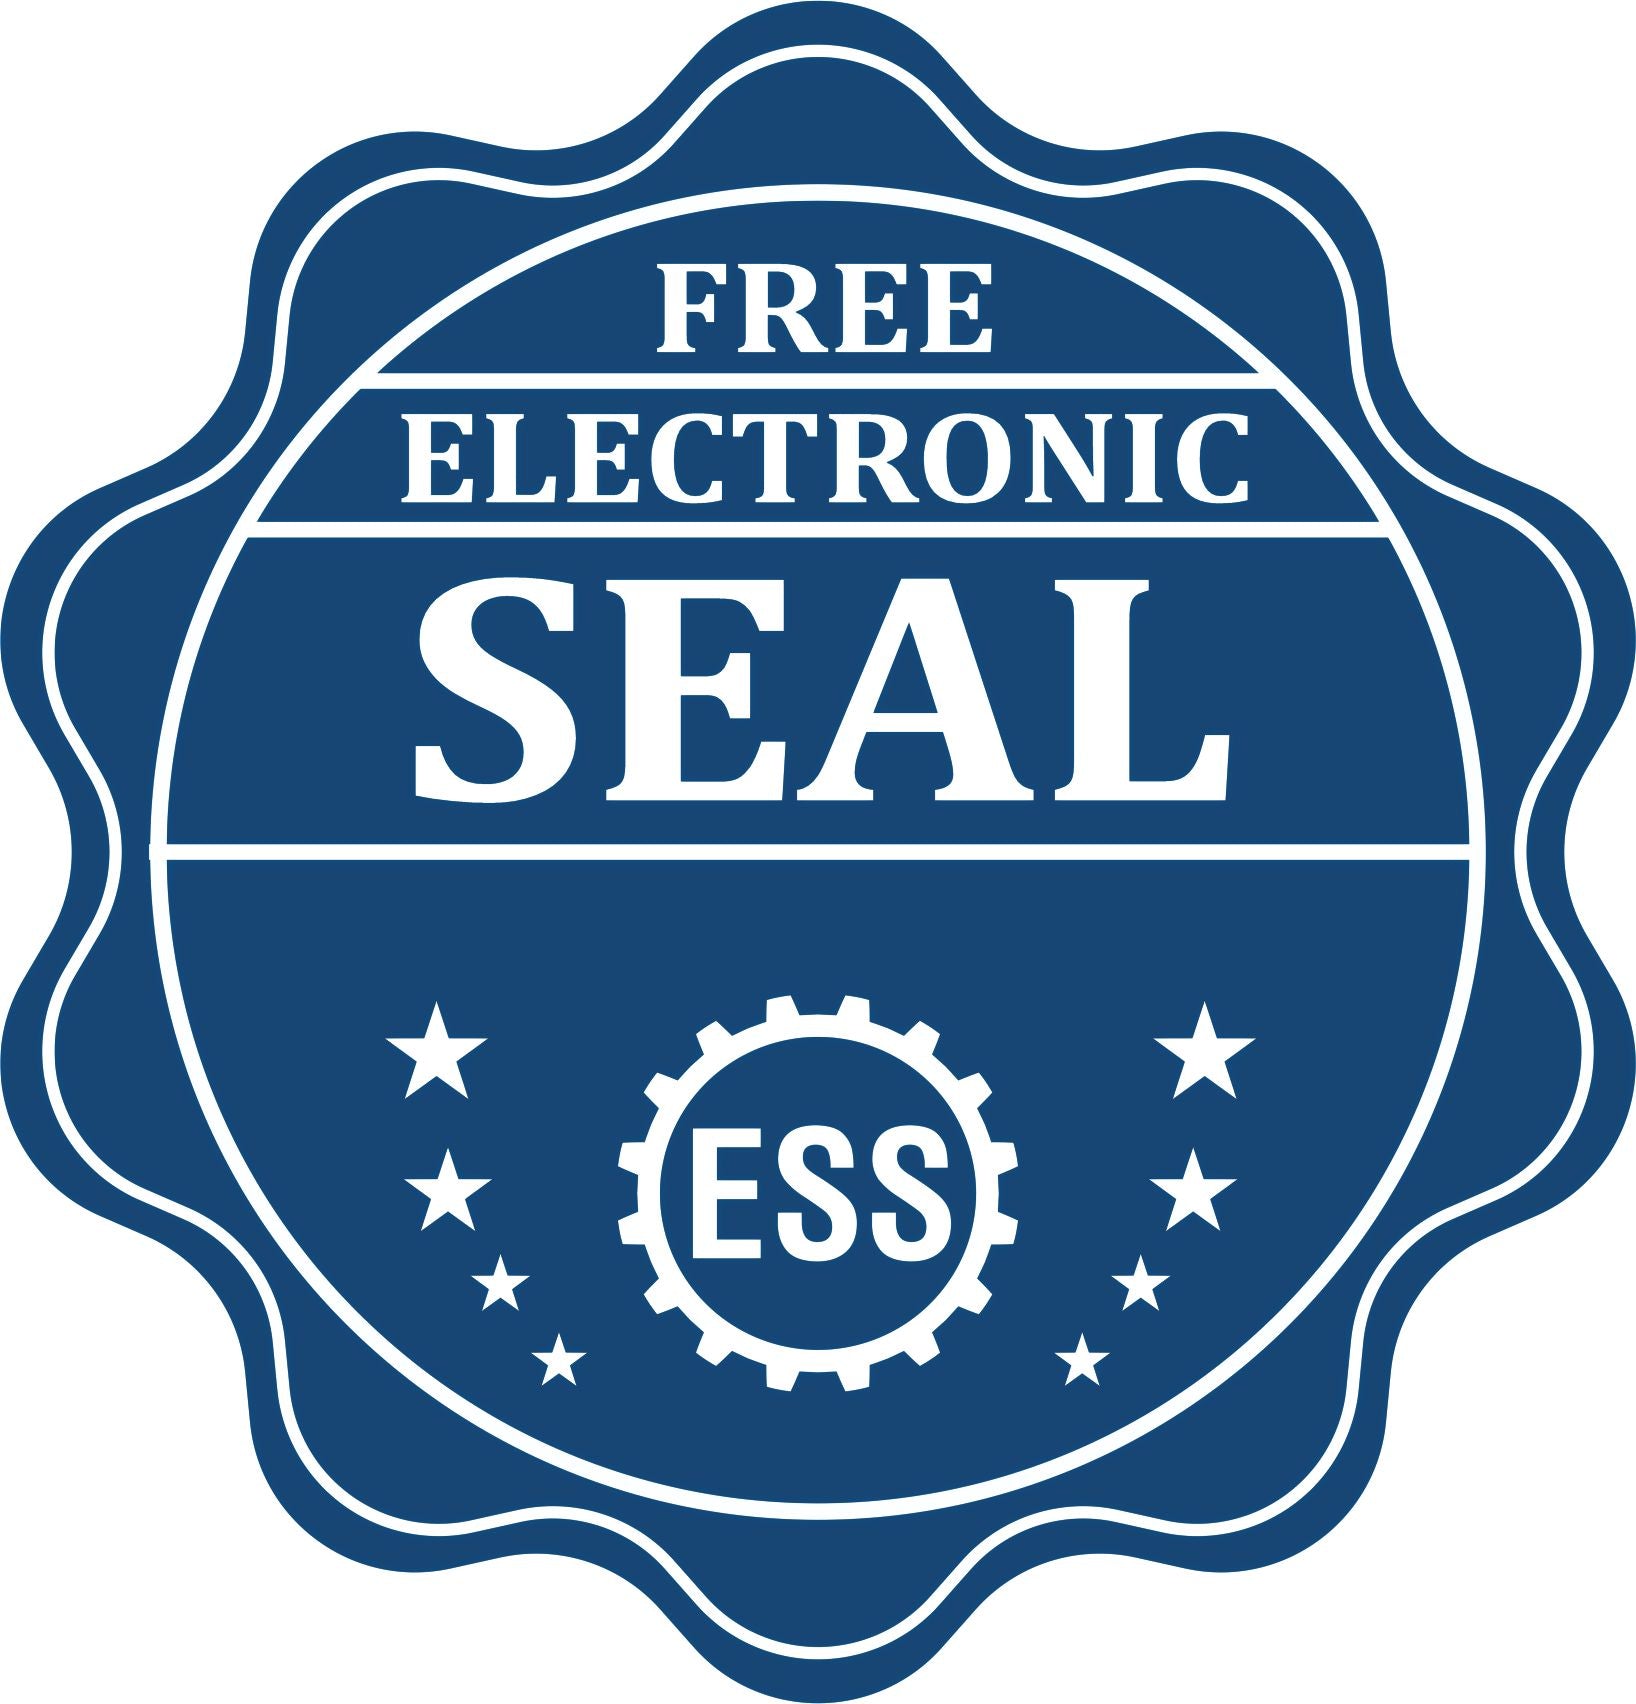 A badge showing a free electronic seal for the Heavy Duty Cast Iron Georgia Architect Embosser with stars and the ESS gear on the emblem.